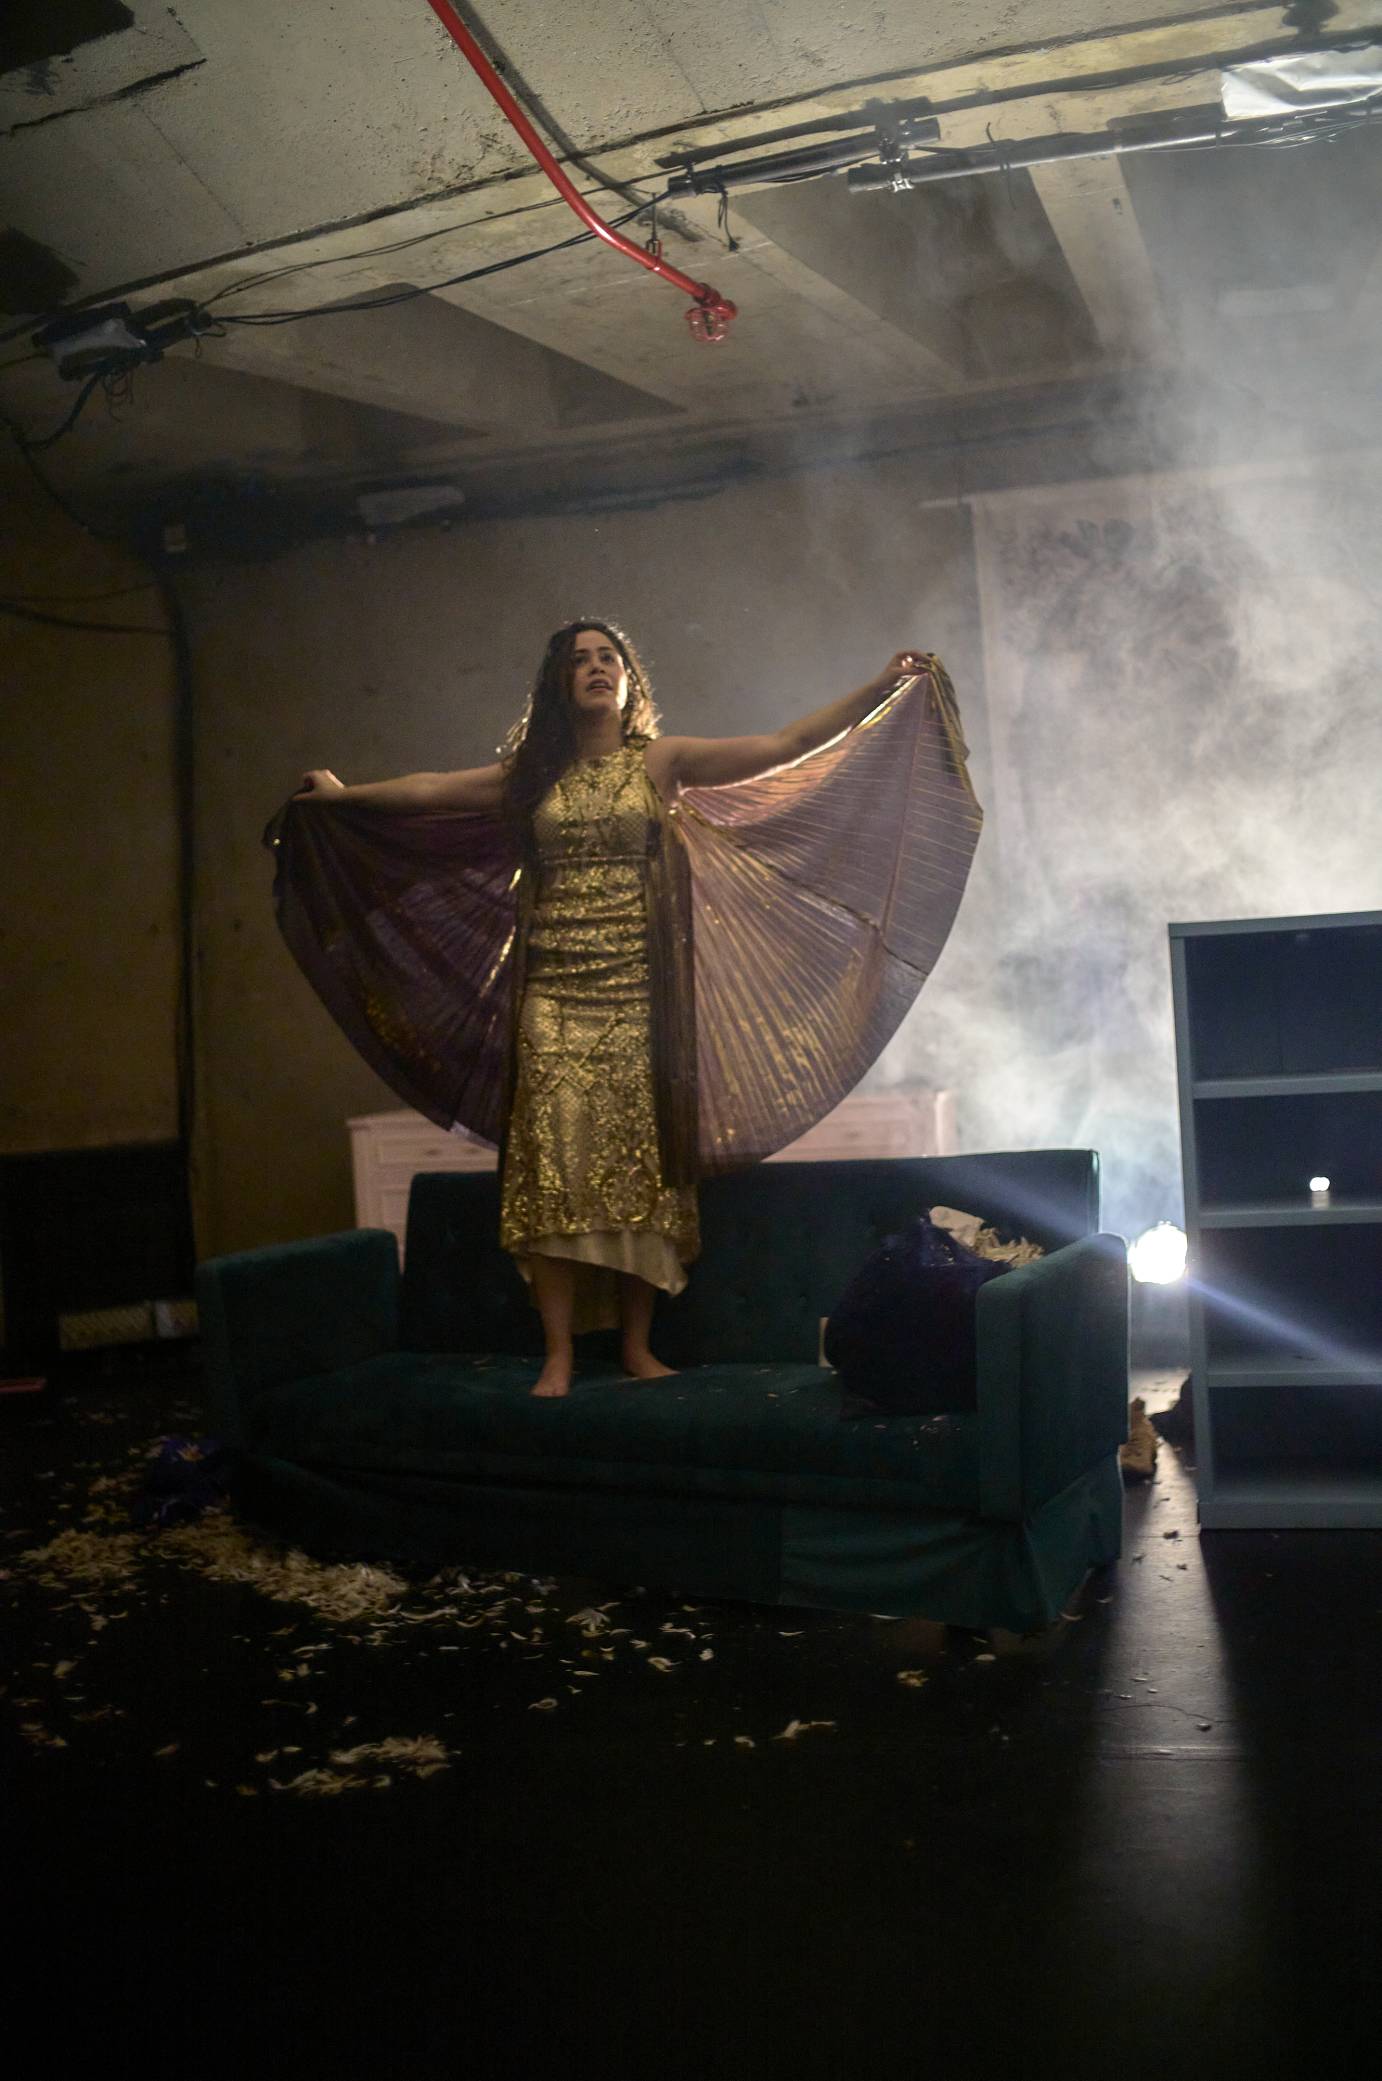 the woman with wet loose hair stands on a couch wearing a glitterin gold outfit with wing extensions that she holds spread out as if an angel. 